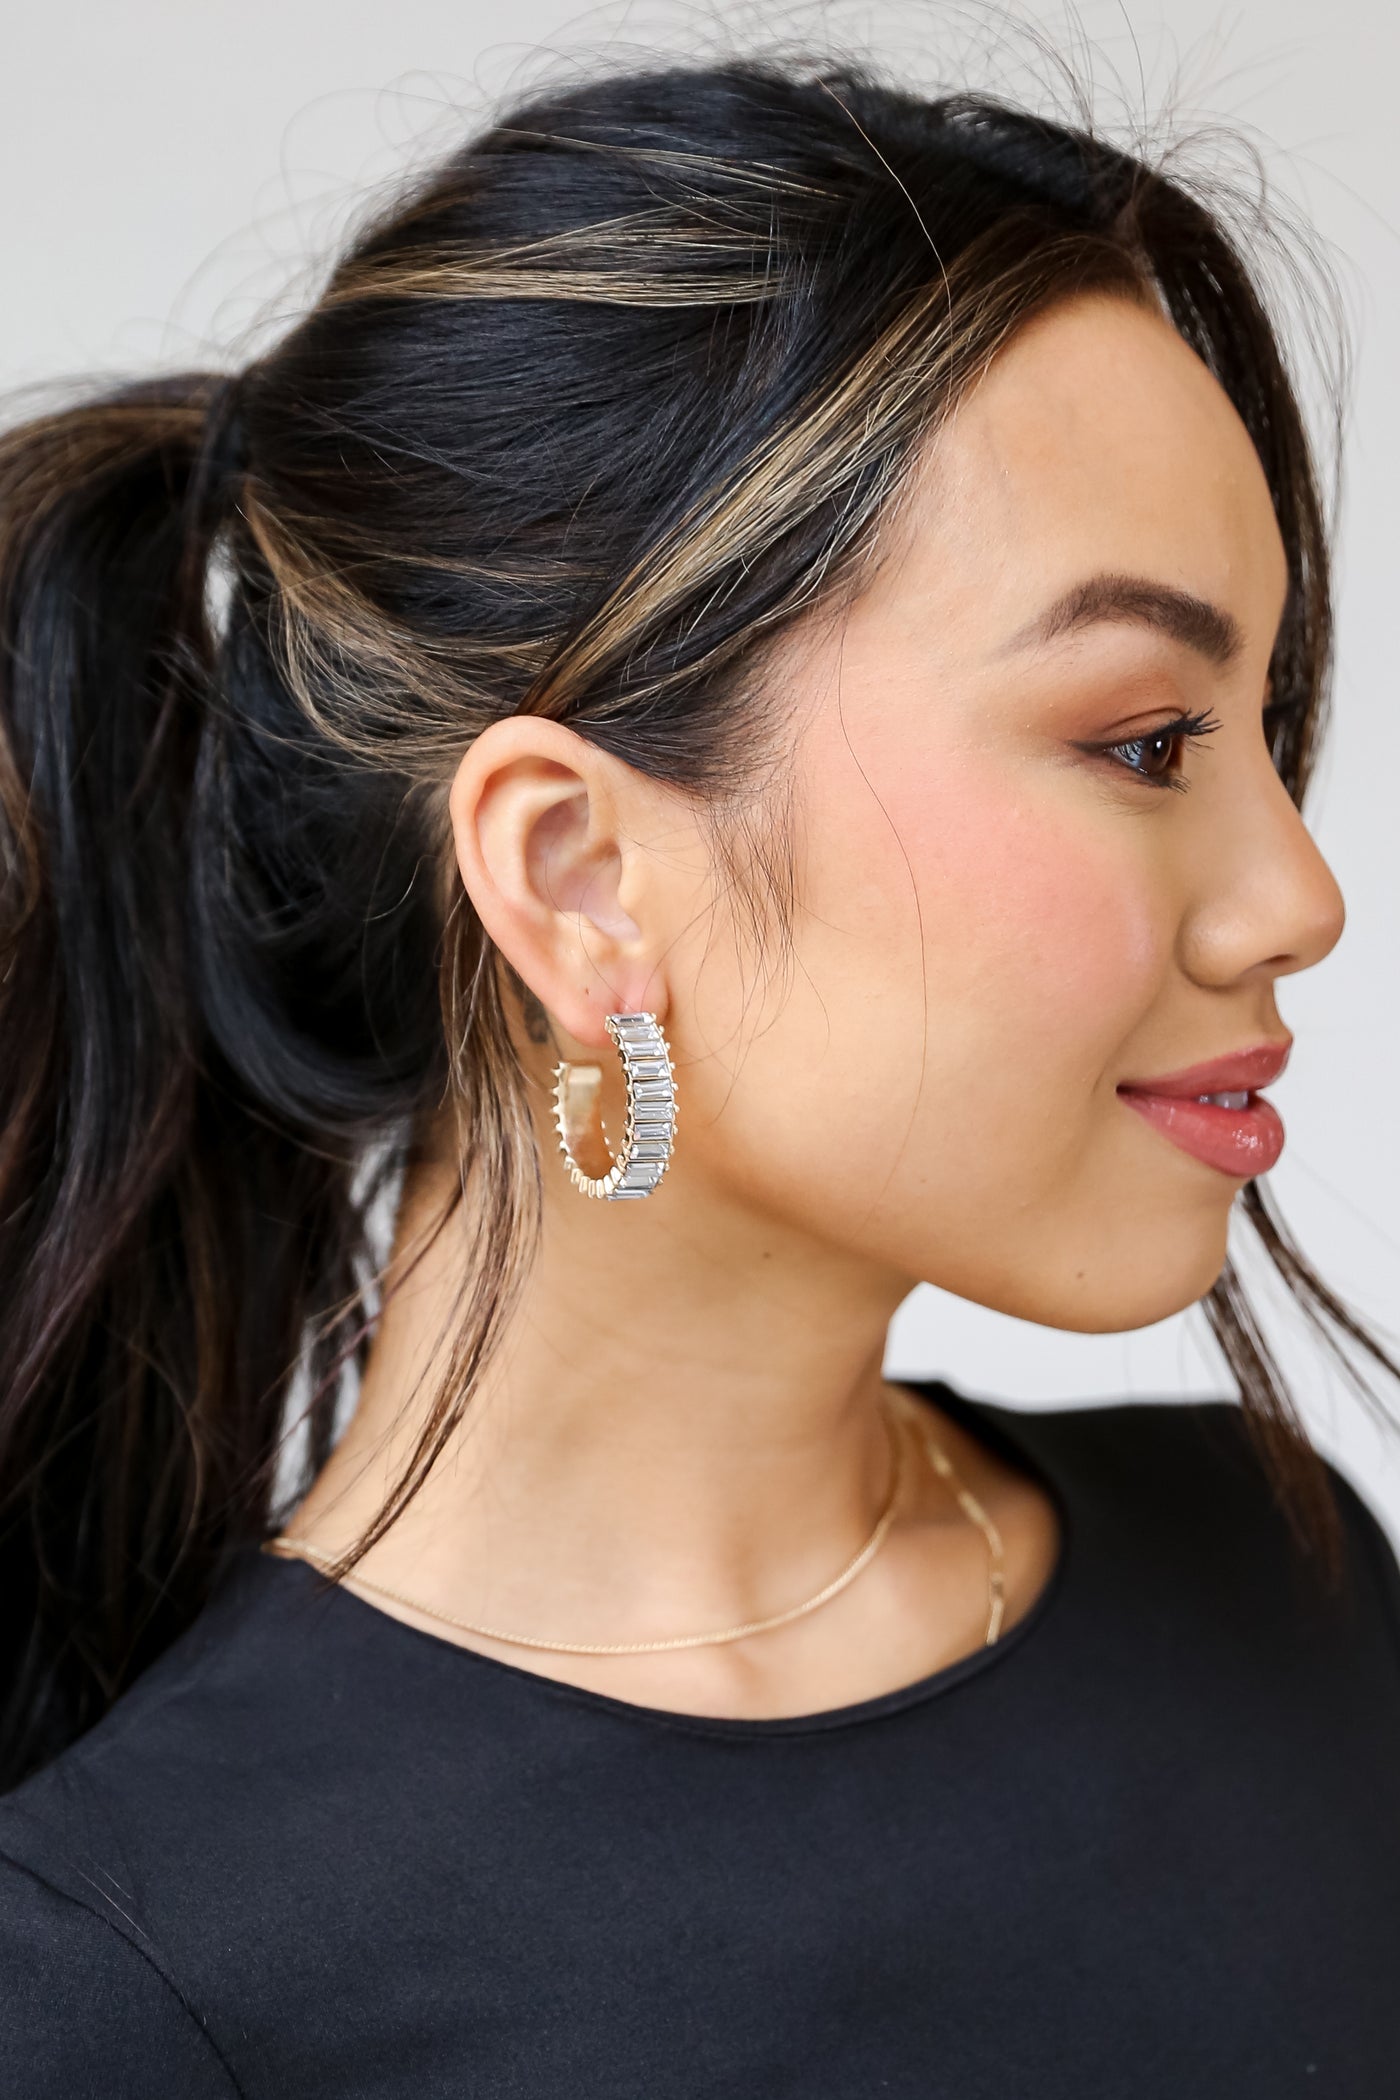 sparkly earrings